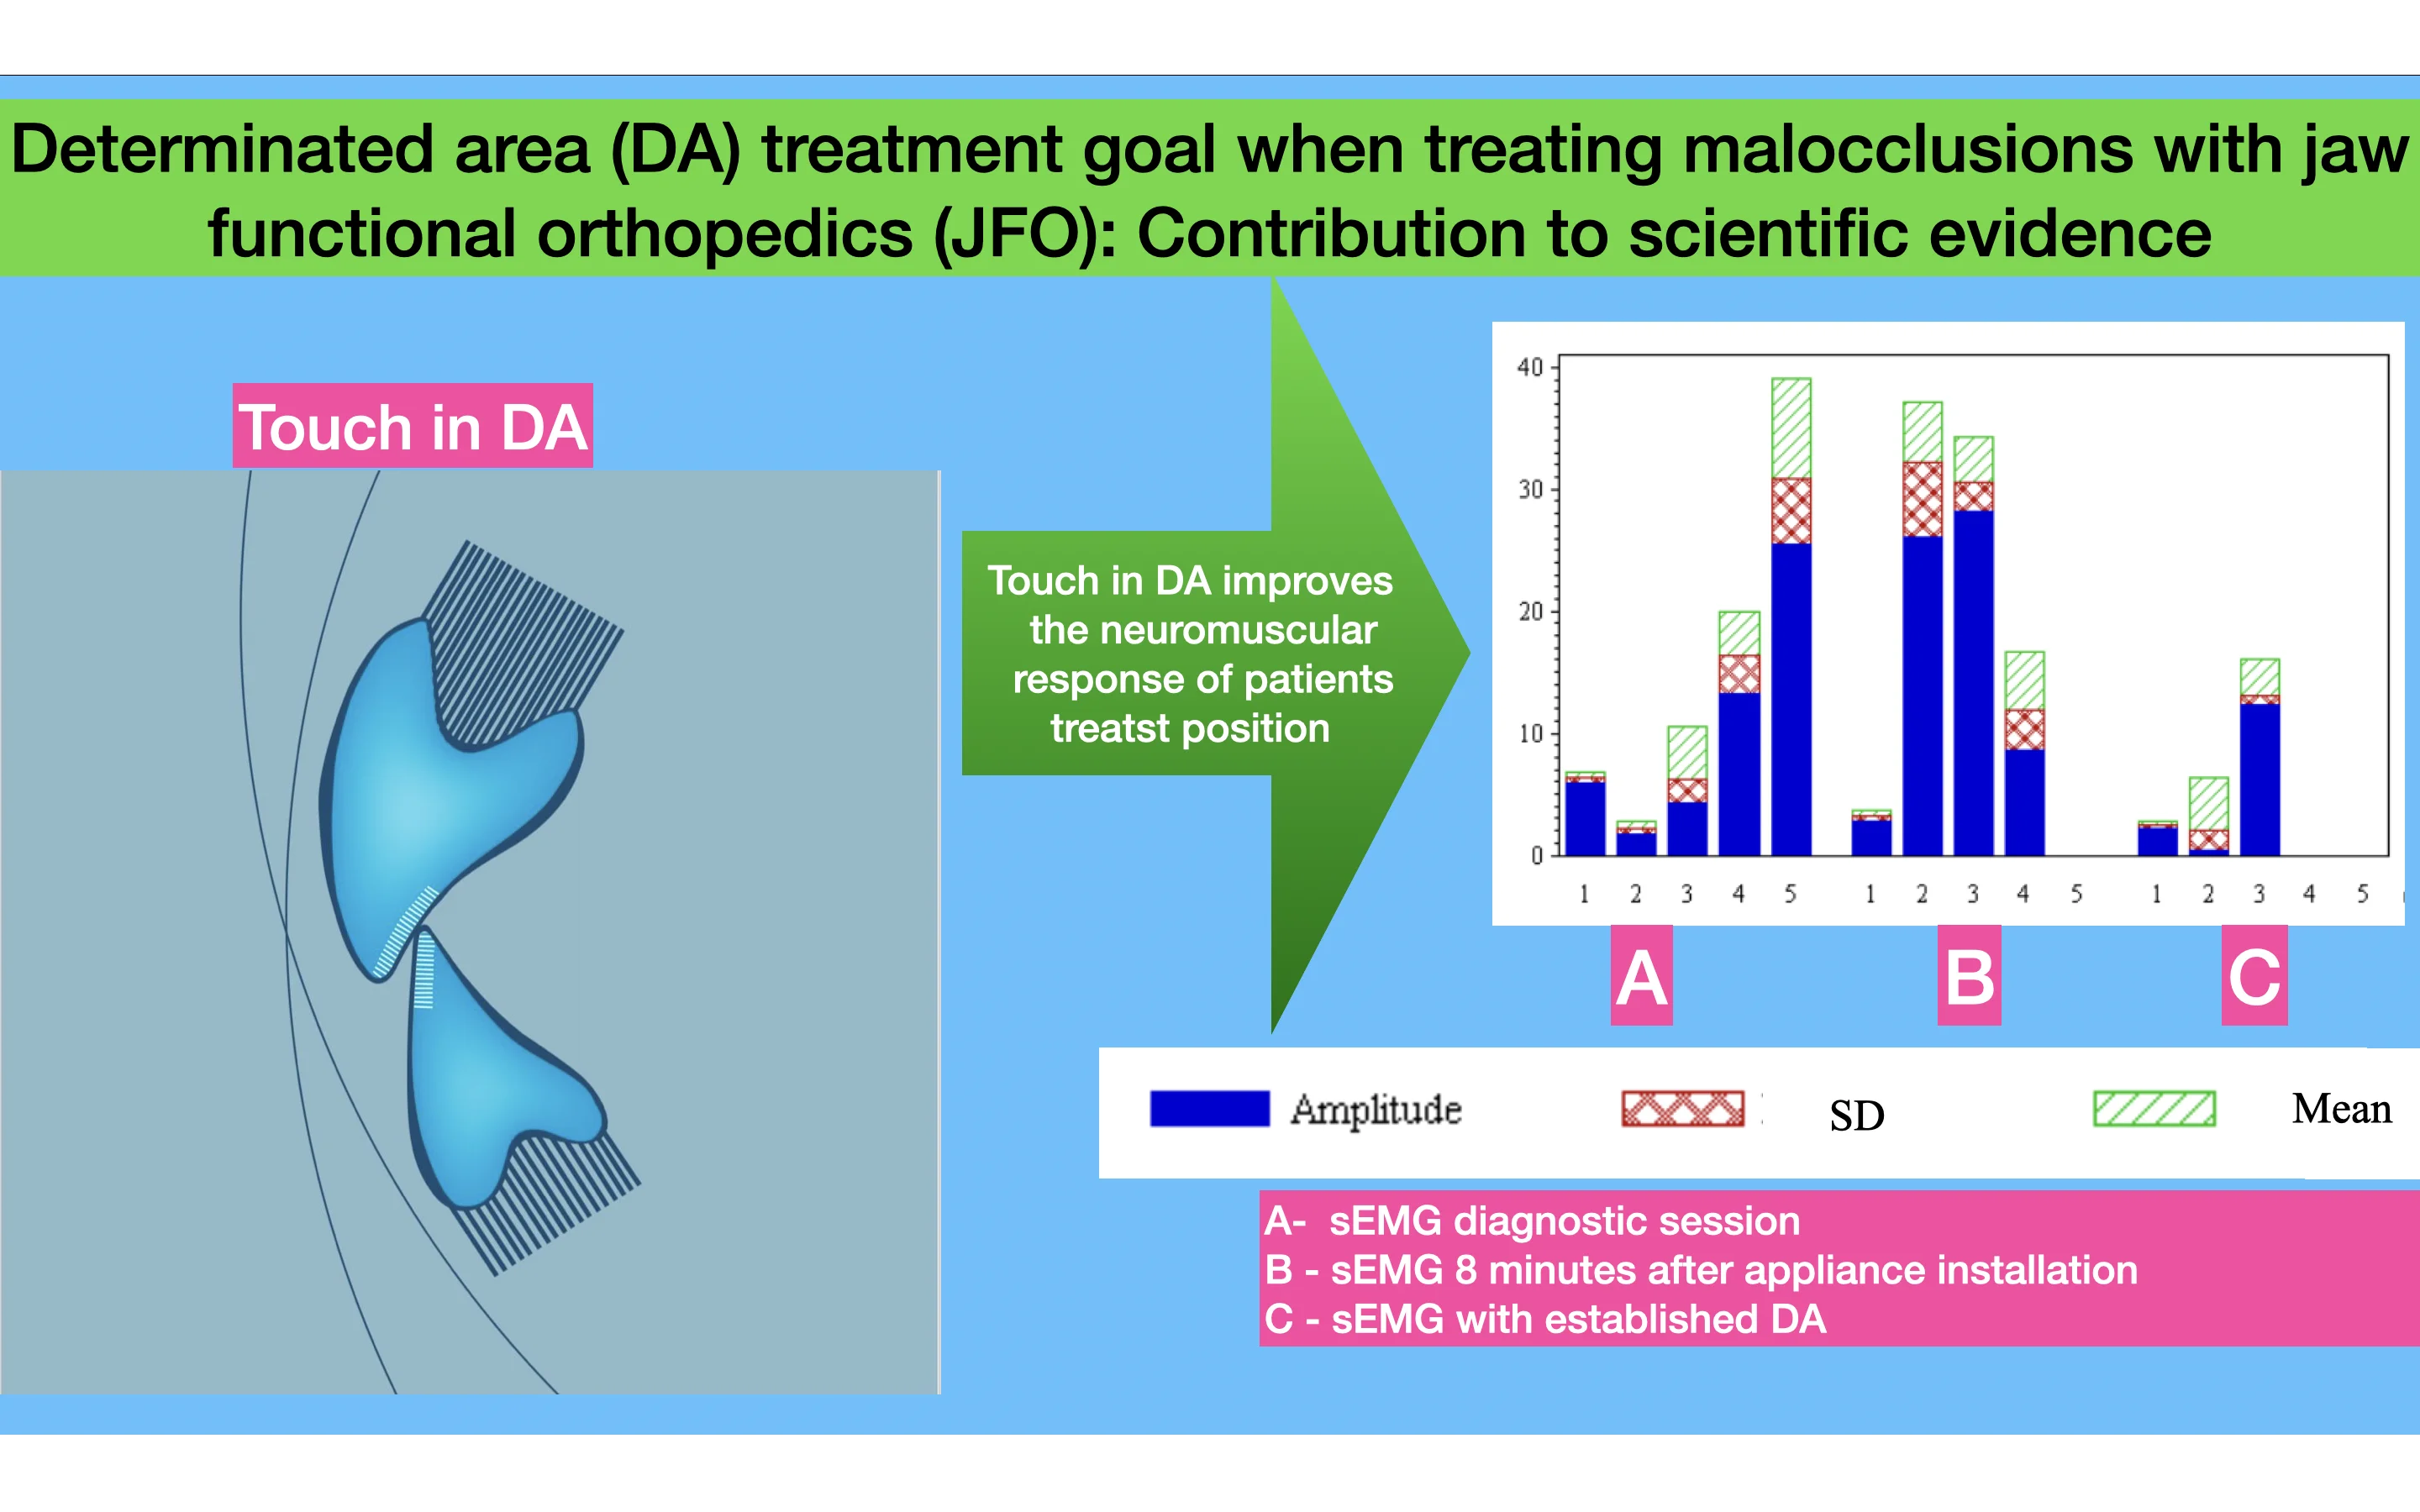 Determinated area (DA) treatment goal when treating malocclusions with jaw functional orthopedics (JFO): Contribution to scientific evidence